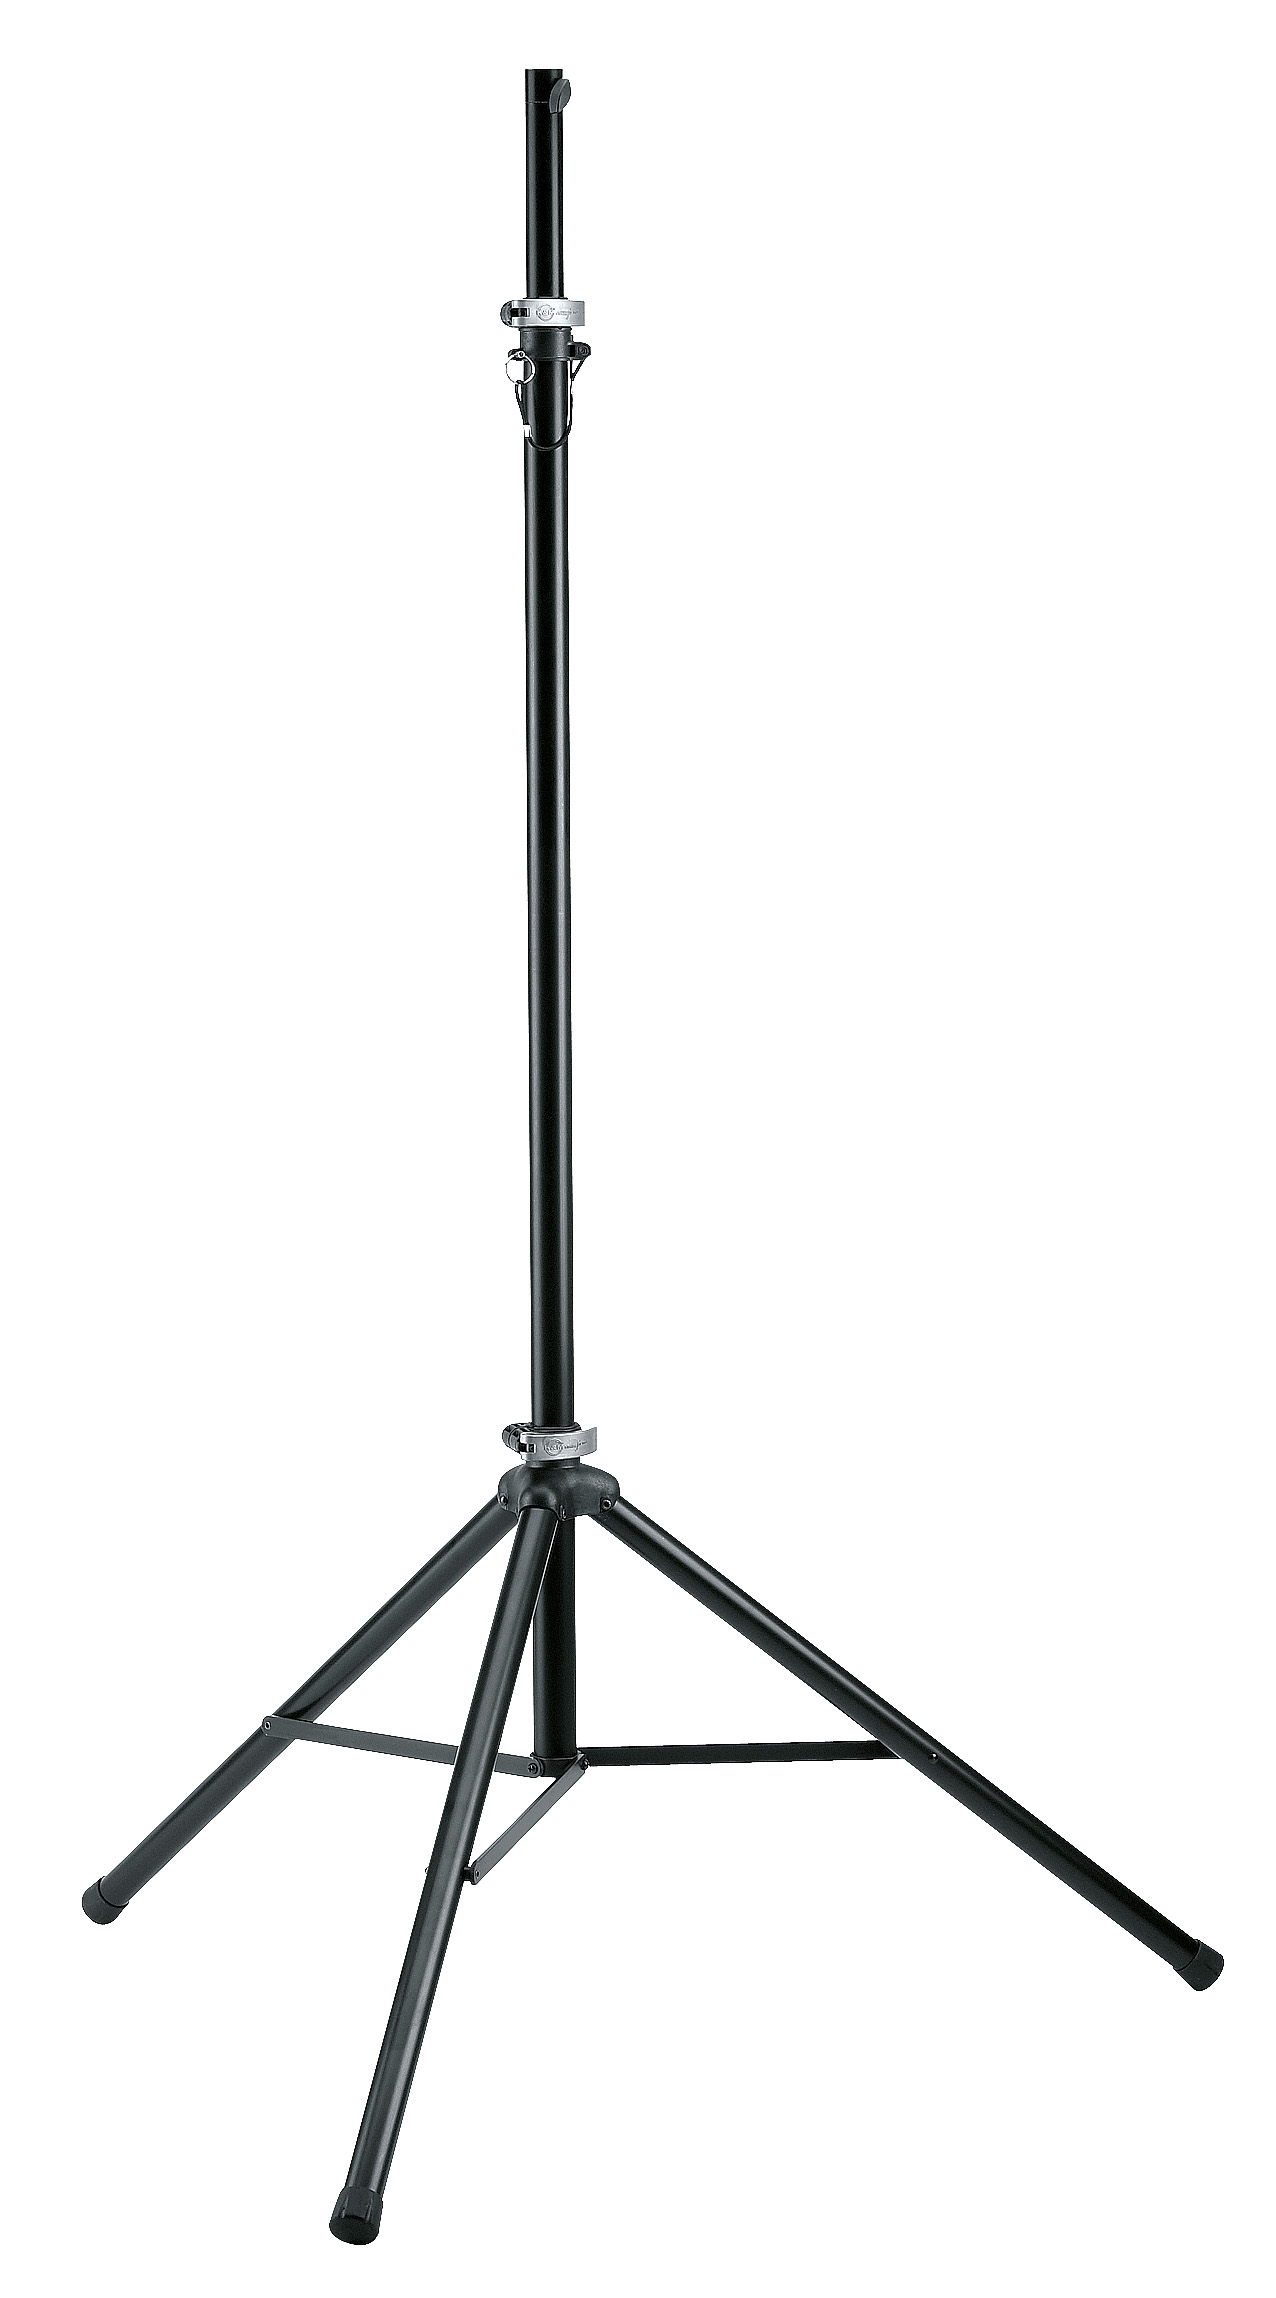 K & M Keyboard Stand Spider anodized aluminum 